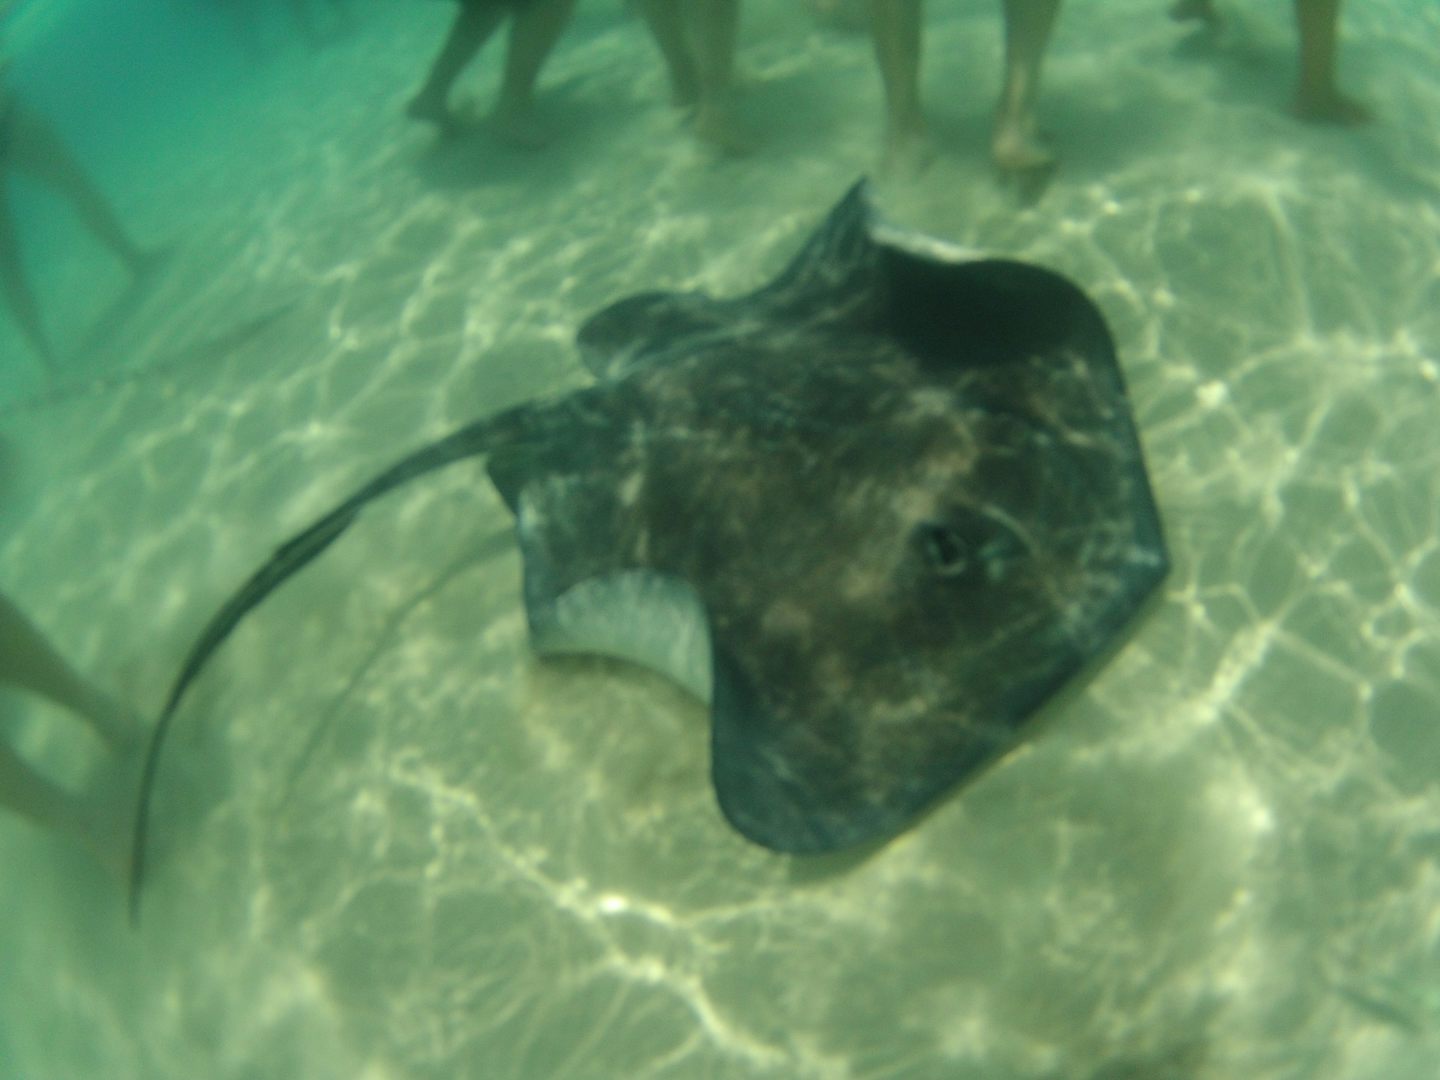 Swim with the sting rays in Grand Cayman